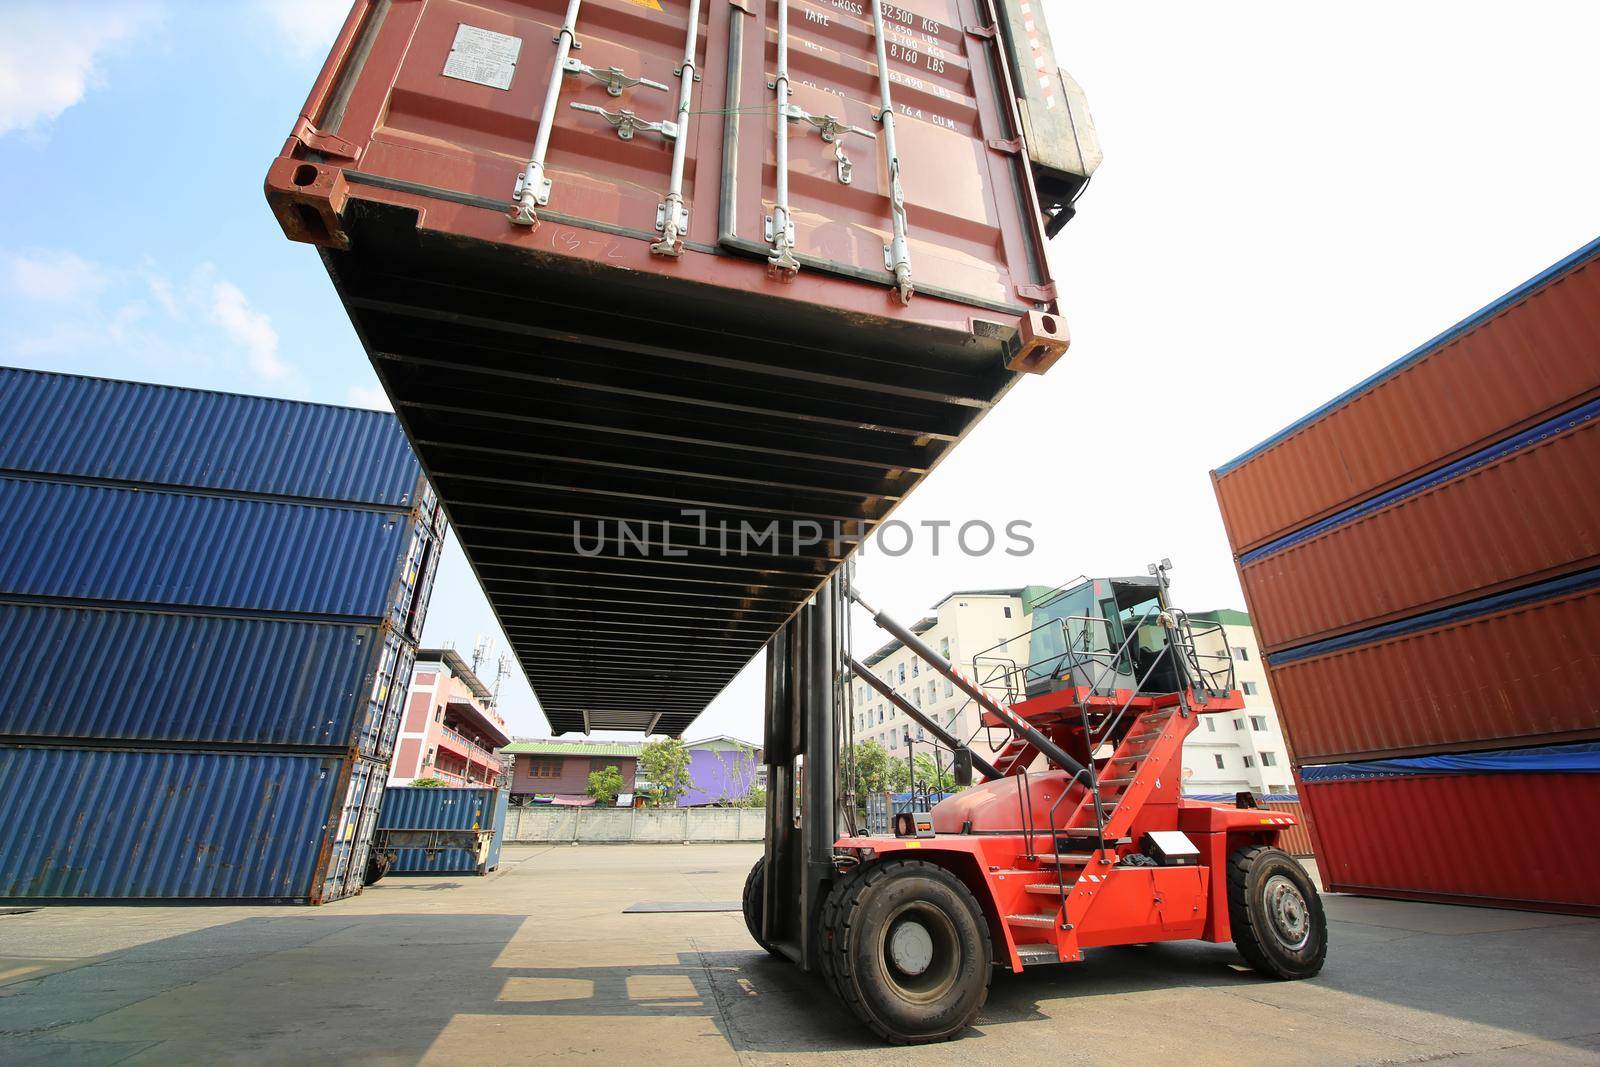 Container Cargo Port Ship Yard Storage Handling of Logistic Transportation Industry. Row of Stacking Containers of Freight Import/Export Distribution Warehouse. Shipping Logistics Transport Industrial, container box in warehouse in shipping port.